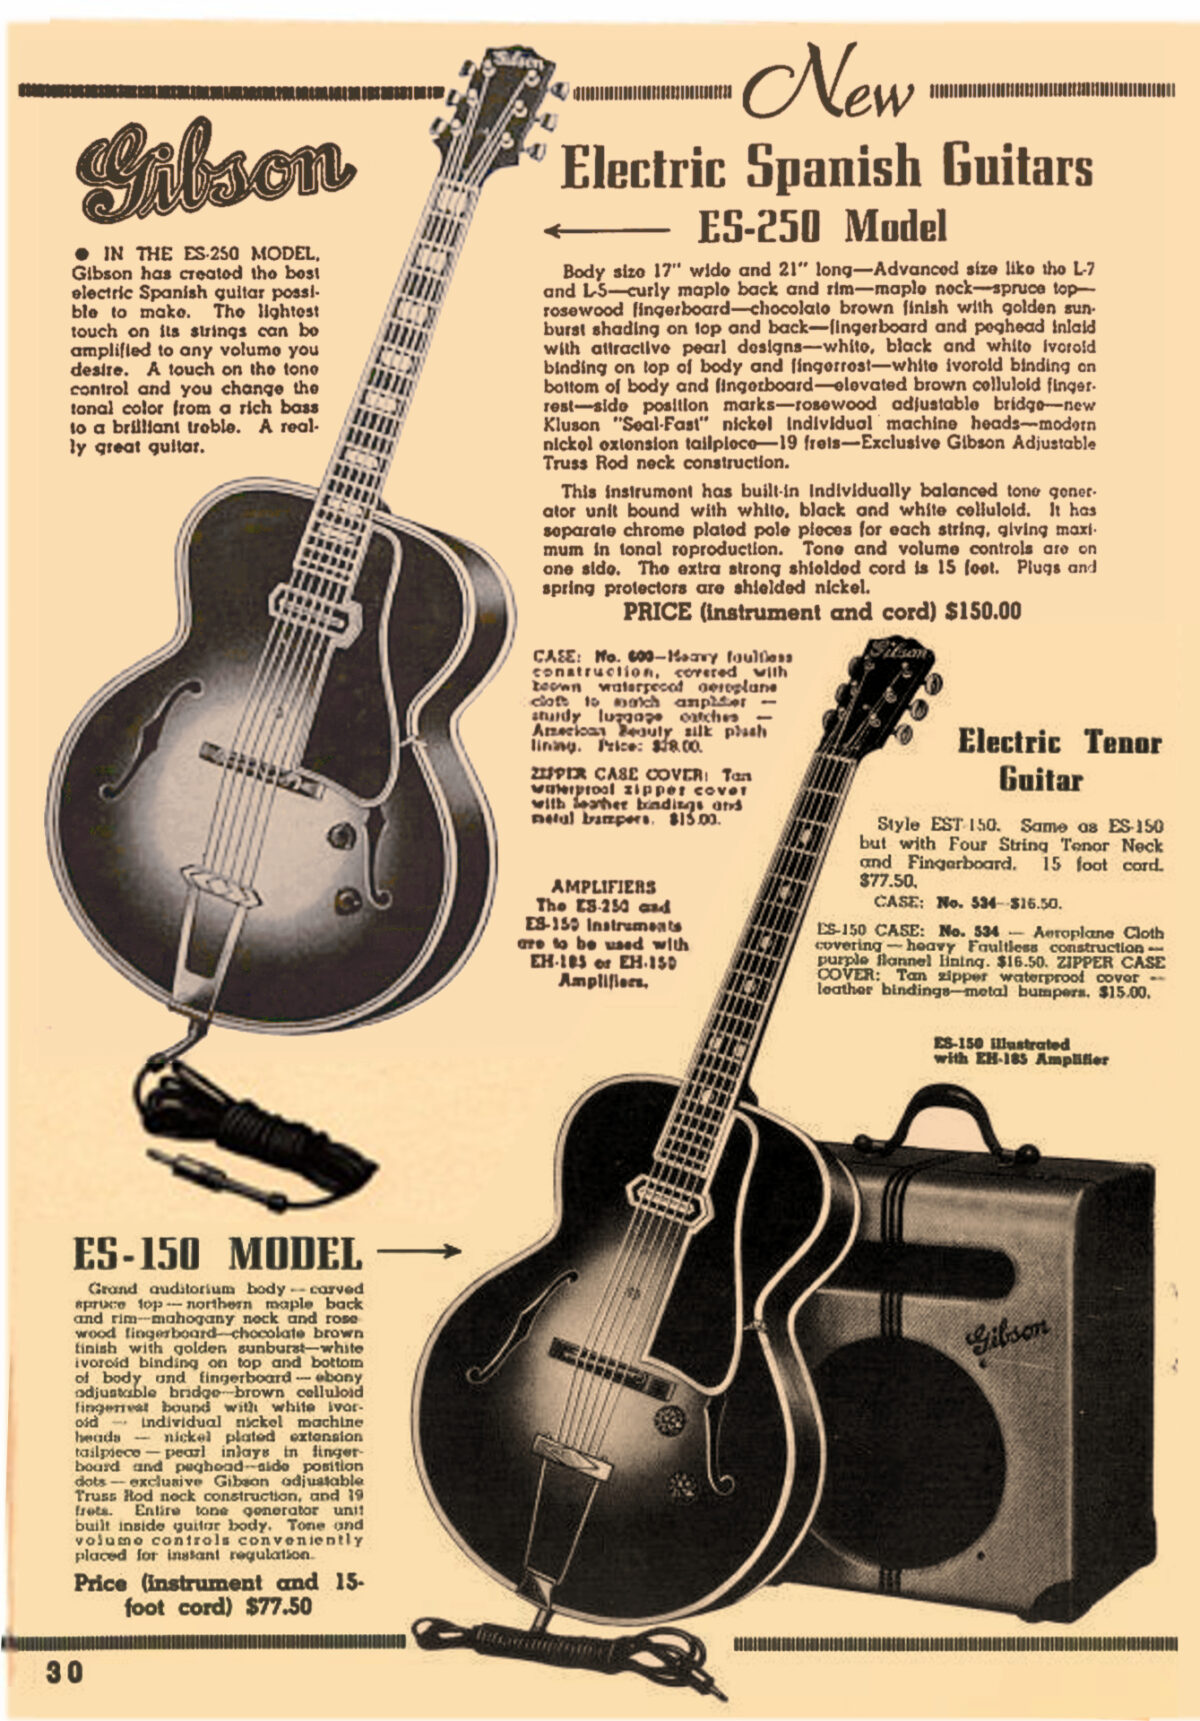 Gibson Guitars: Fascinating Stories Behind an American Icon 